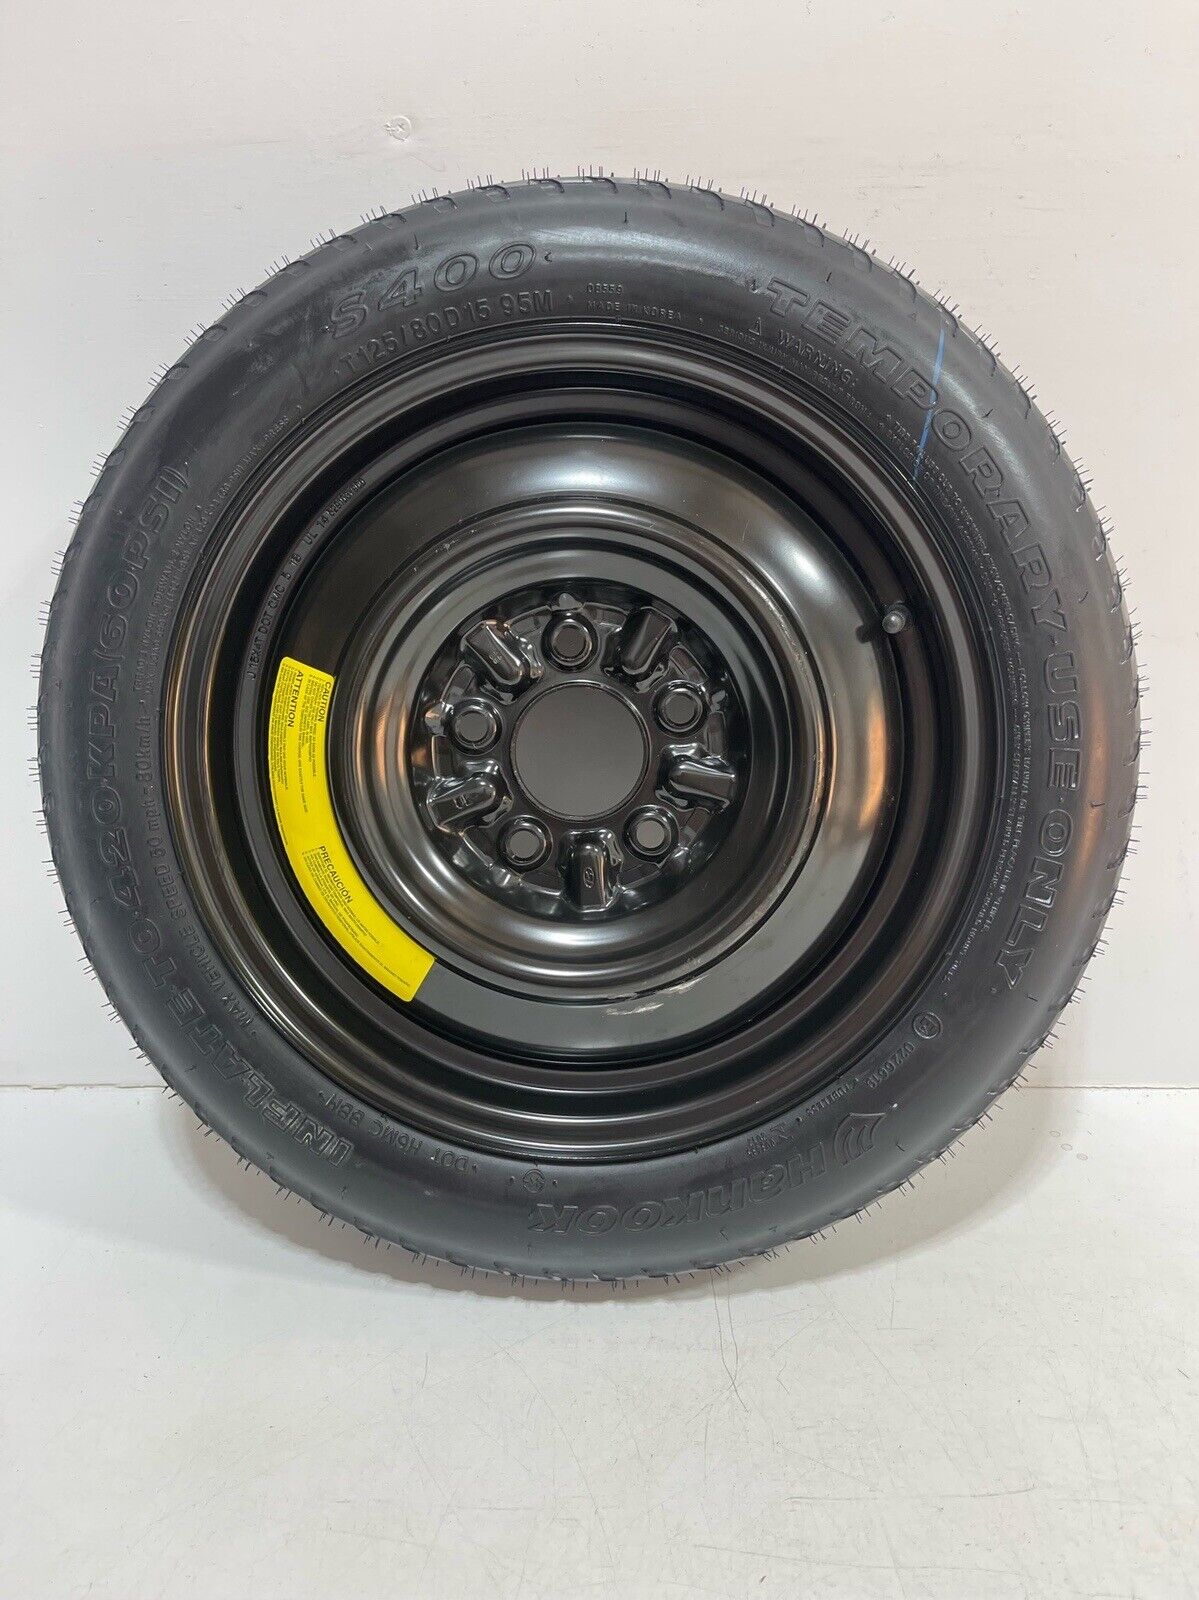 02-12 Mitsubishi Galant Eclipse Spare Tire Wheel Compact Space Saver T125/70/D16